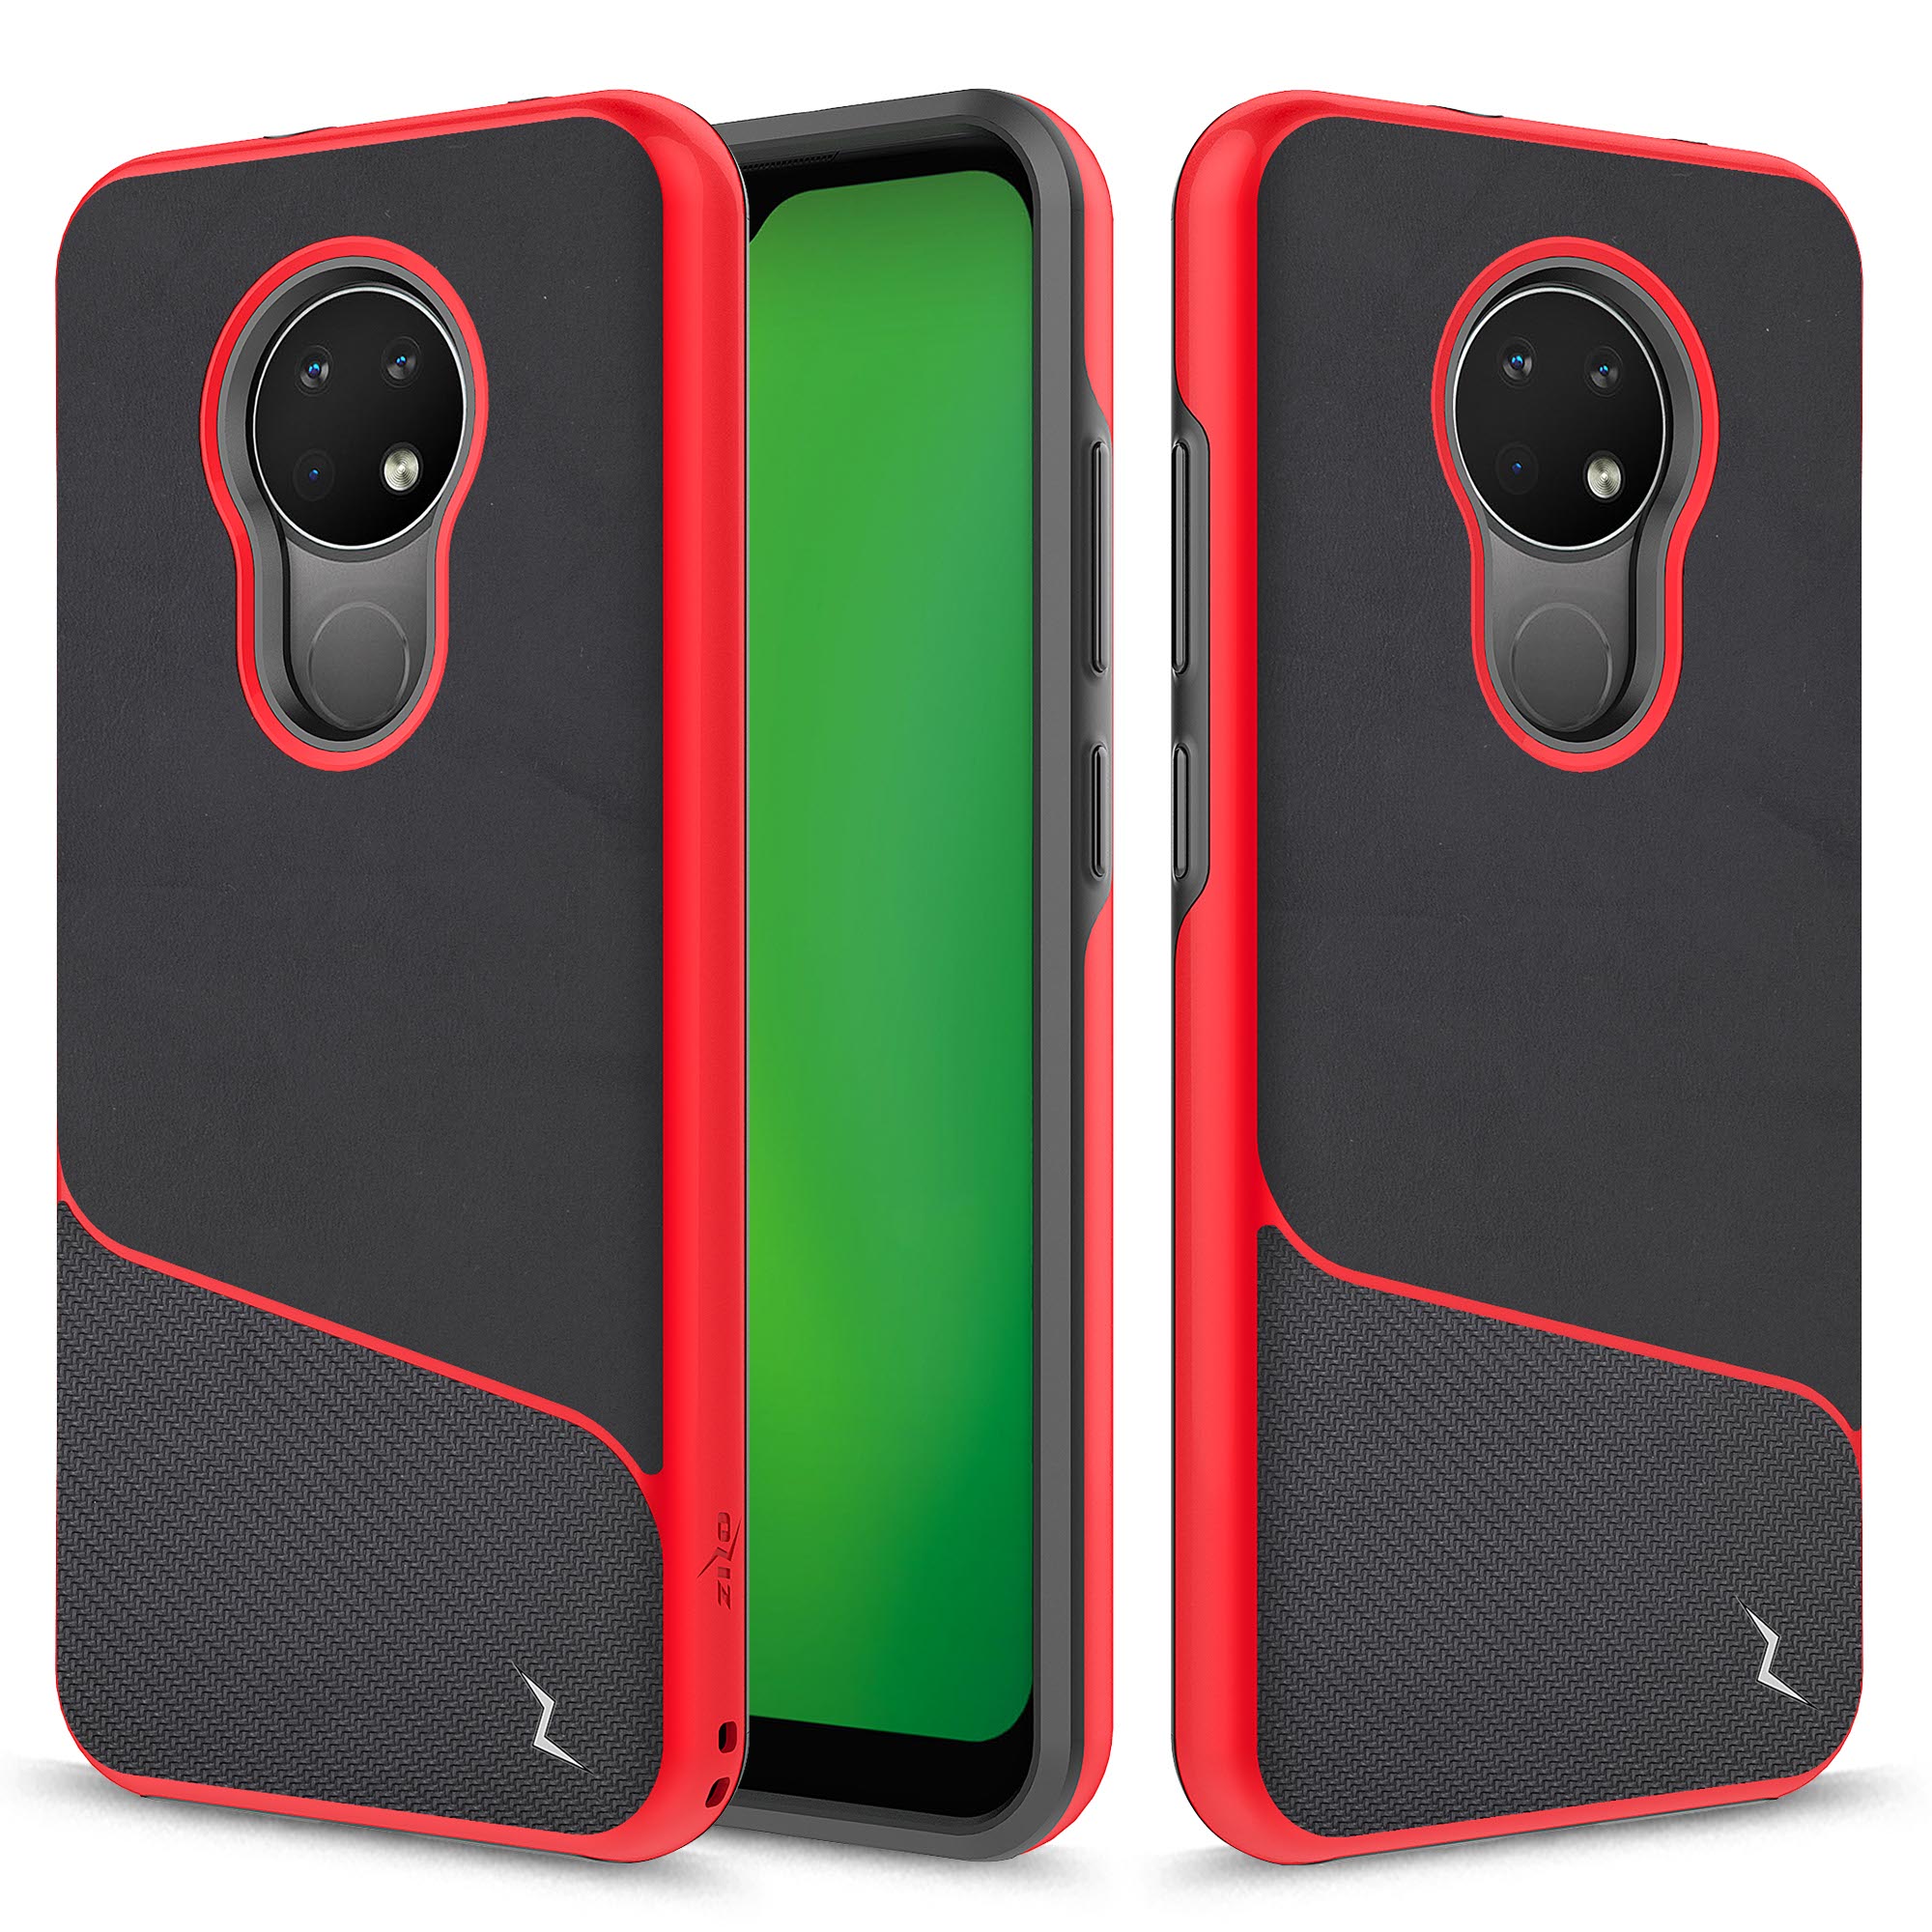 CRICKET OVATION ZIZO DIVISION SERIES CASE - BLACK & RED (10099)